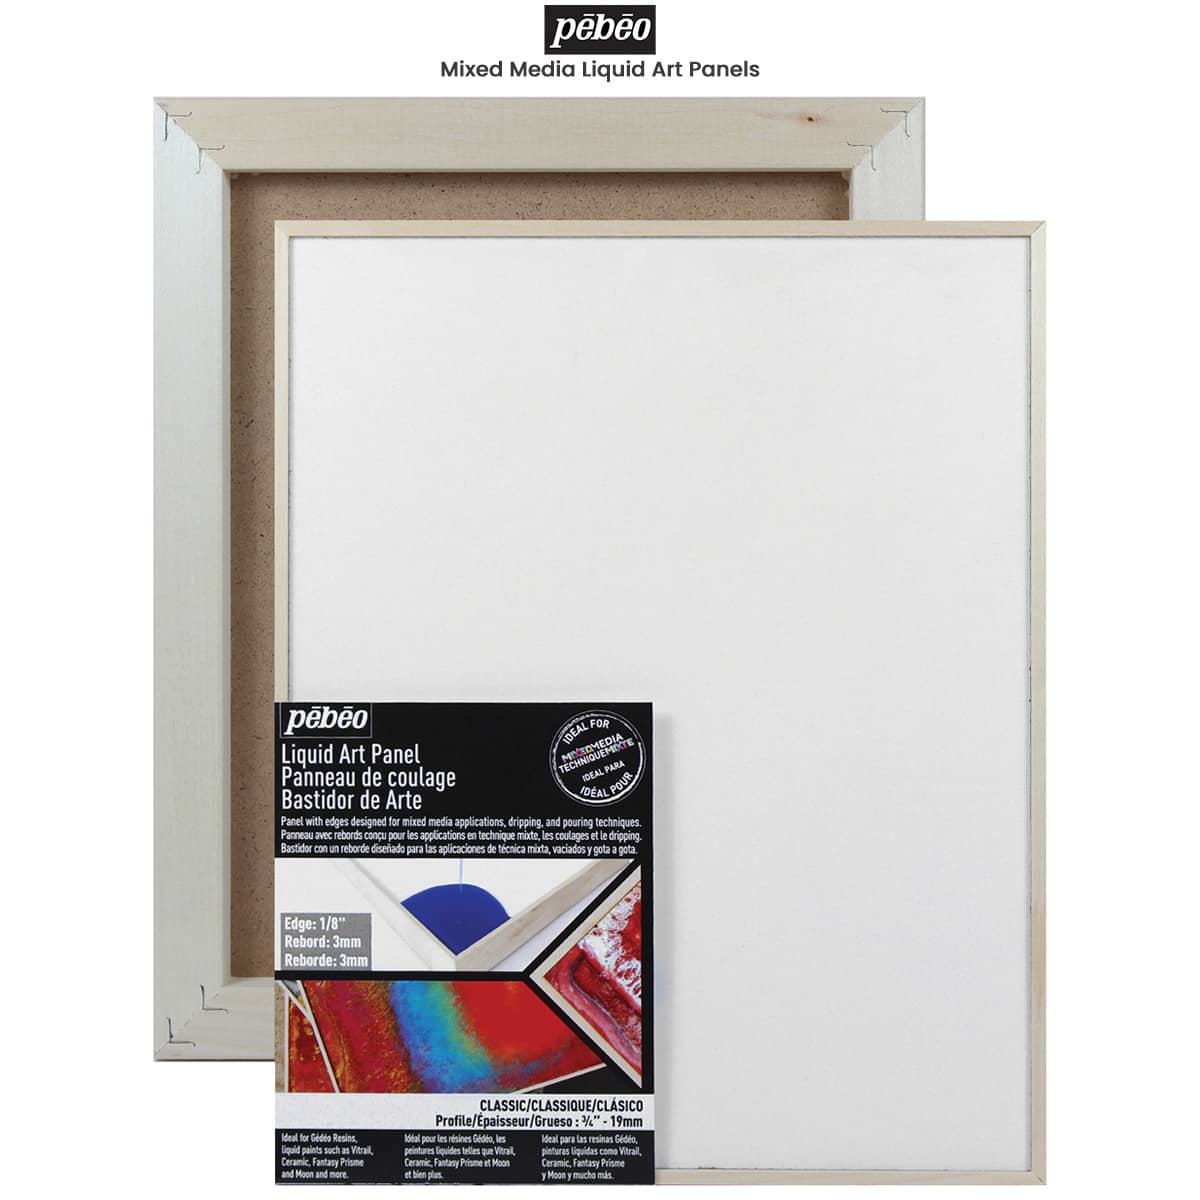 Blank Canvas - Canvas Frames Panel Board for Painting,100% Cotton Triple  Primed Gesso Canvases Art Paint Supply by Artistik (Pack of 12-16 x 12)